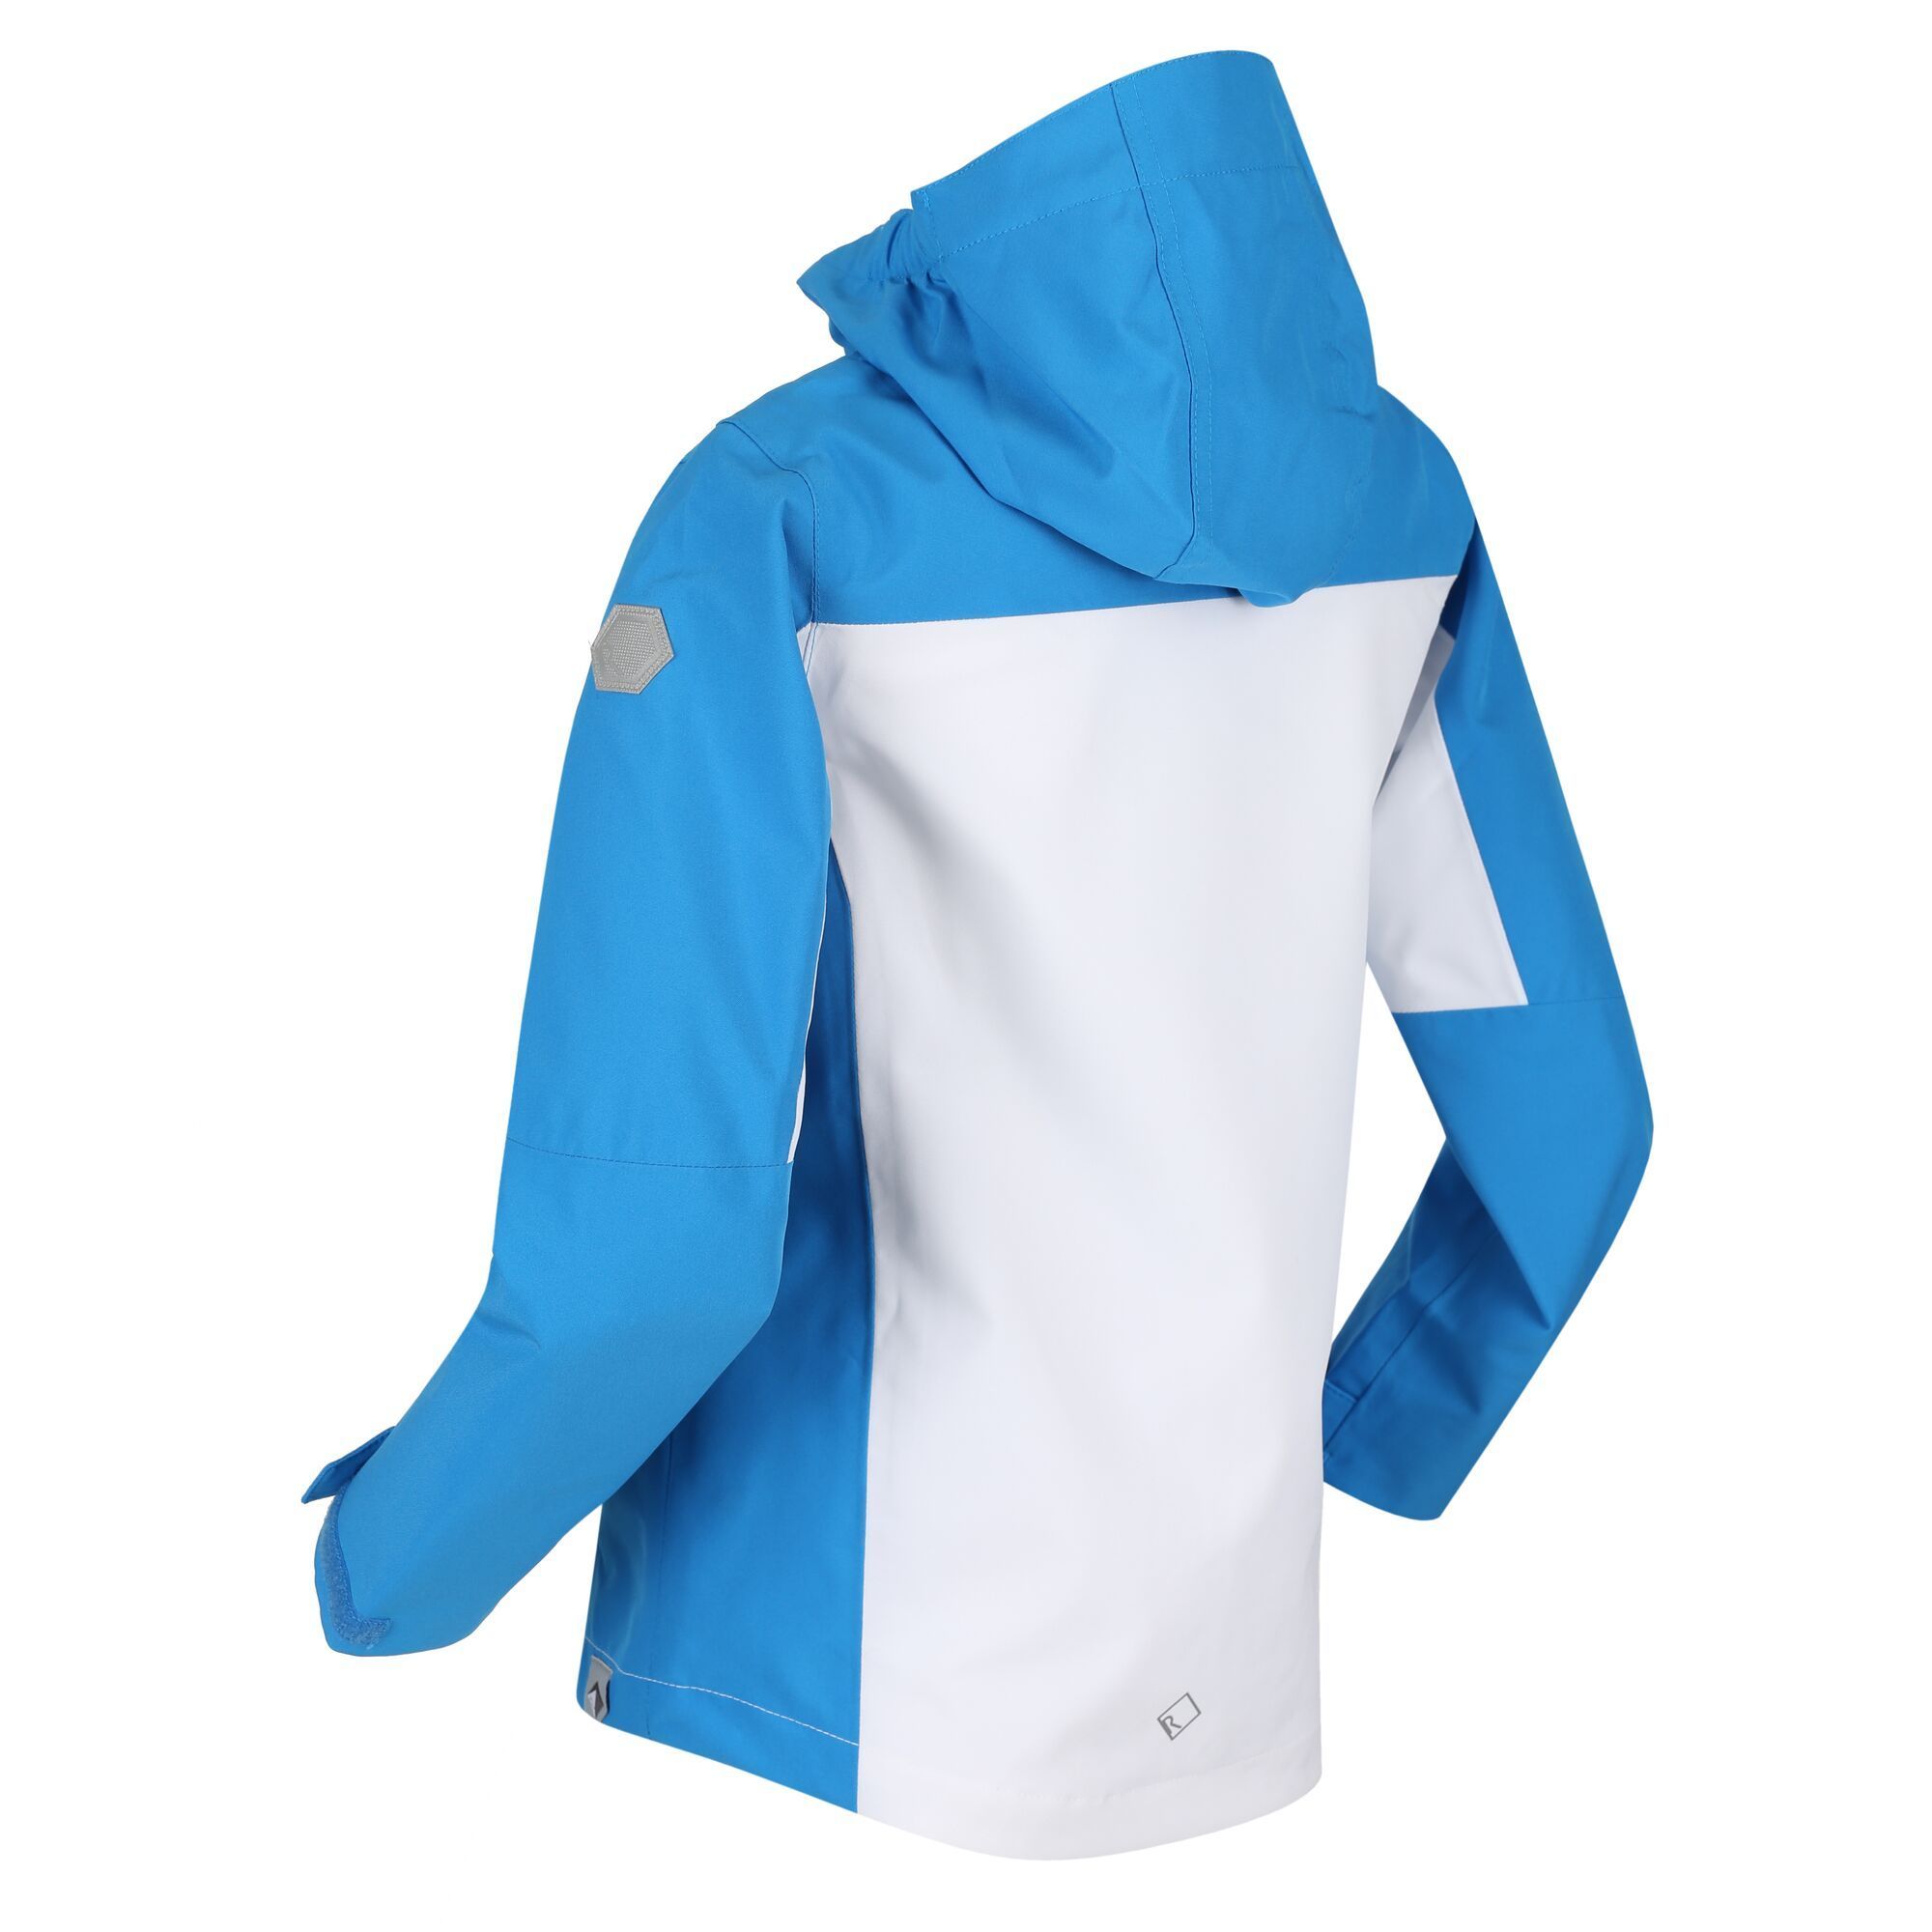 Material: 100% Polyester (Isotex 10000 stretch fabric). Durable, water repellent and breathable hooded jacket with high collar and soft mesh lining. Taped seams and adjustable cuffs. 2 zipped lower and 1 zipped chest pocket. Regatta outdoors logo print on the chest.